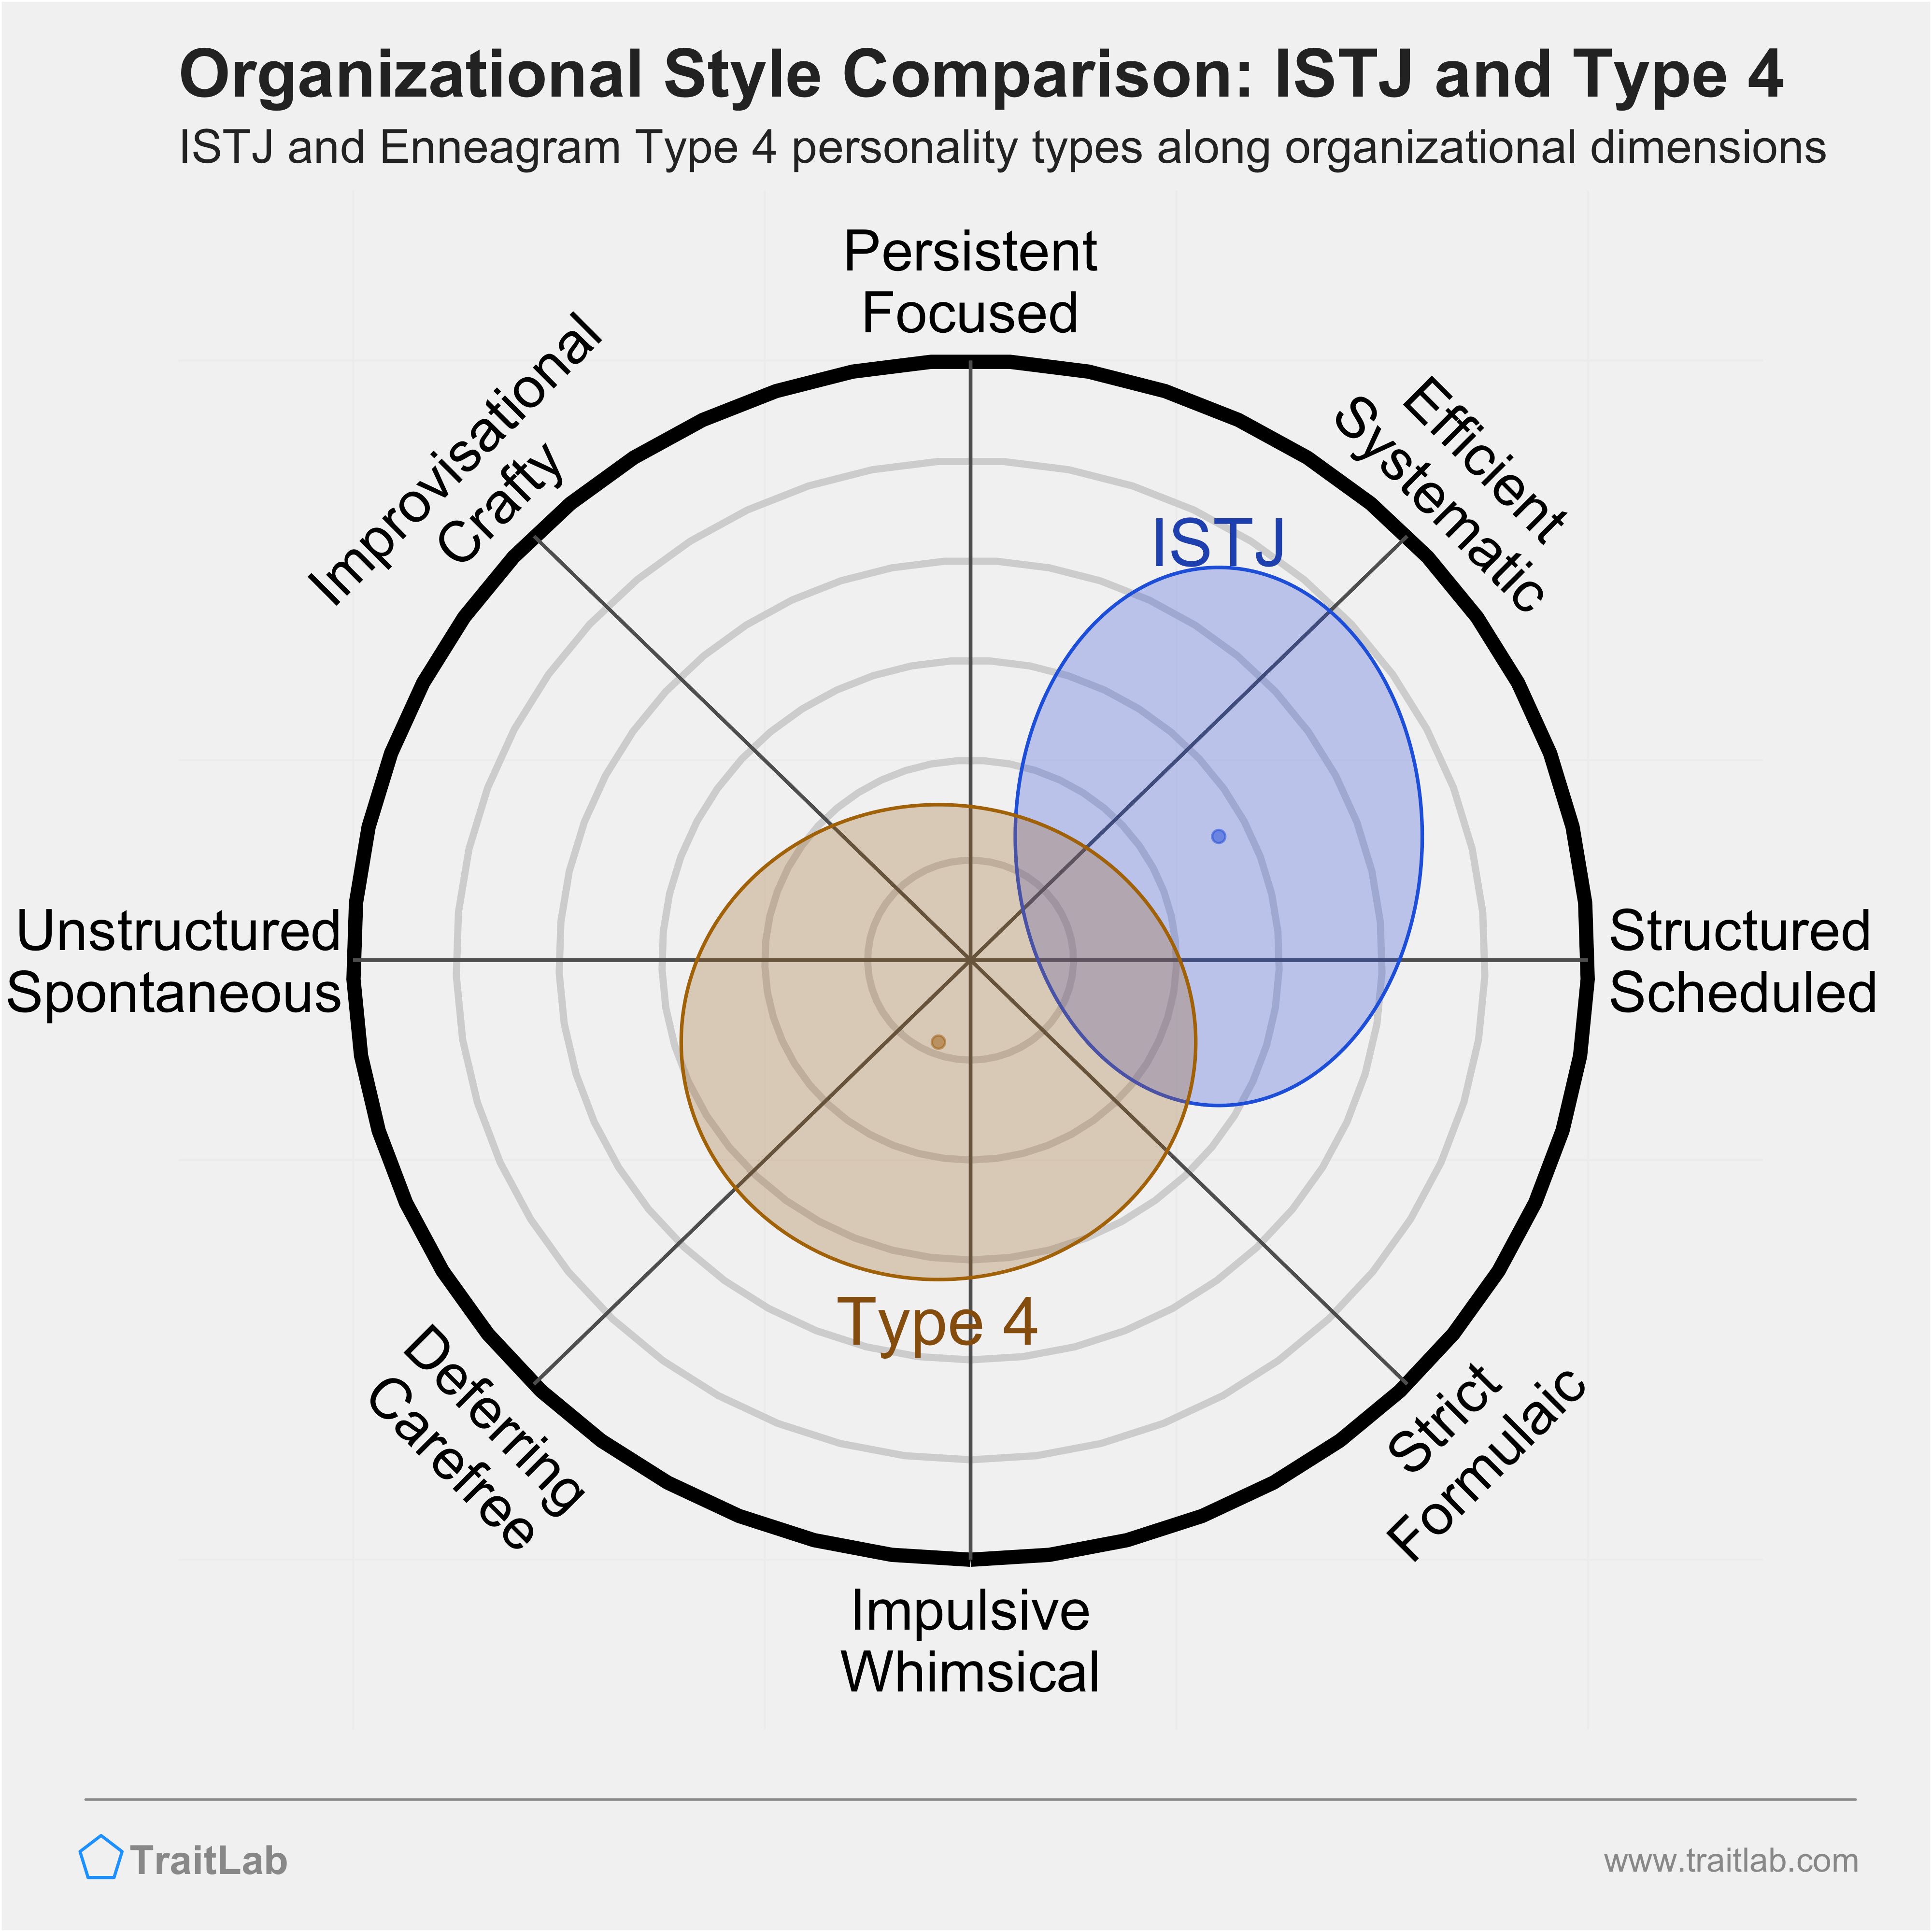 ISTJ and Type 4 comparison across organizational dimensions